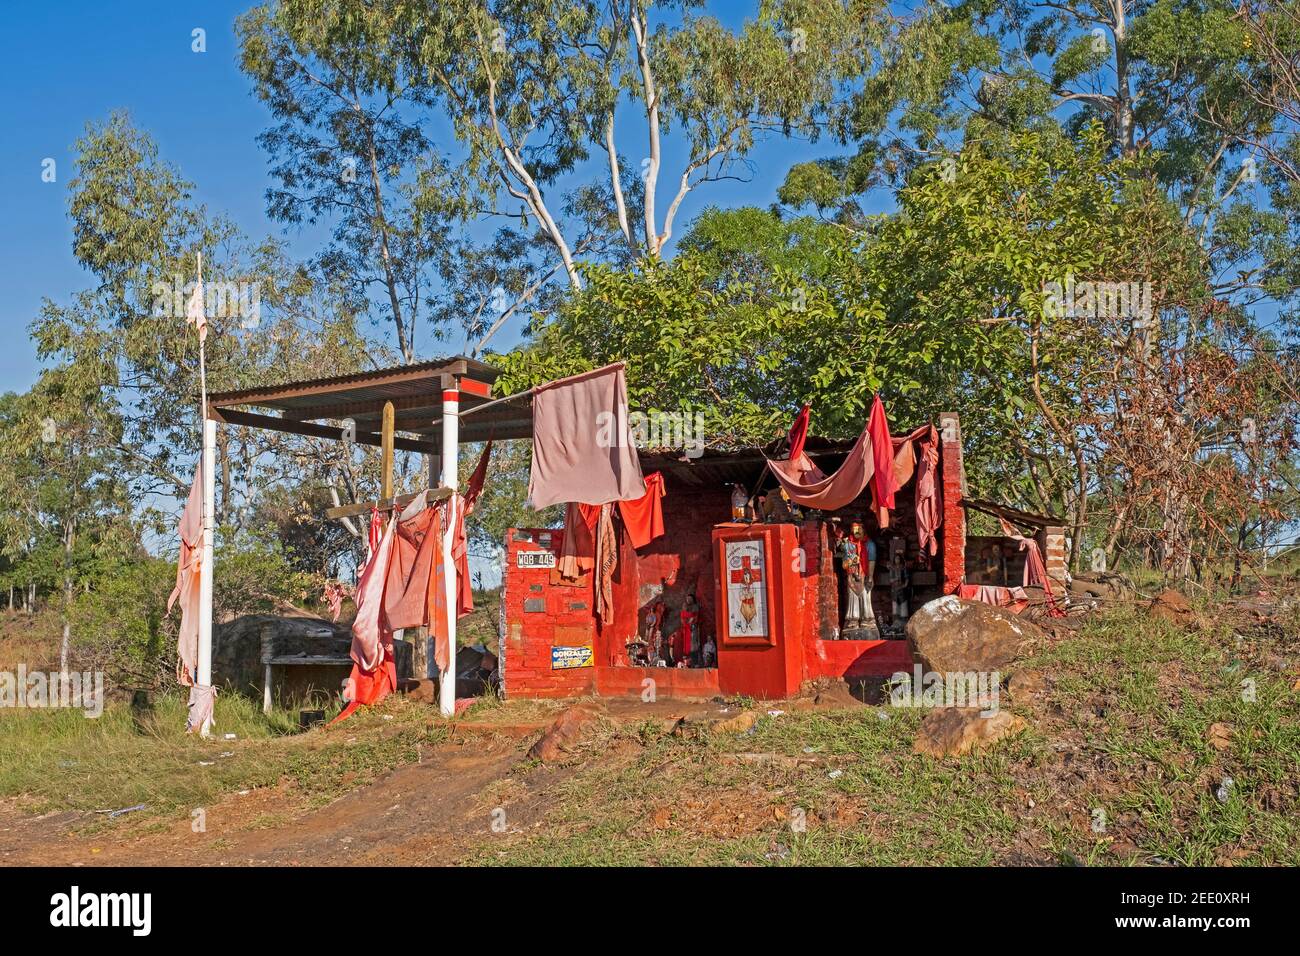 Traditional red roadside shrine to folk saint Gauchito Gil / Little Gaucho Gil, Argentine patron saint of travellers, cowboys and Gauchos, Argentina Stock Photo